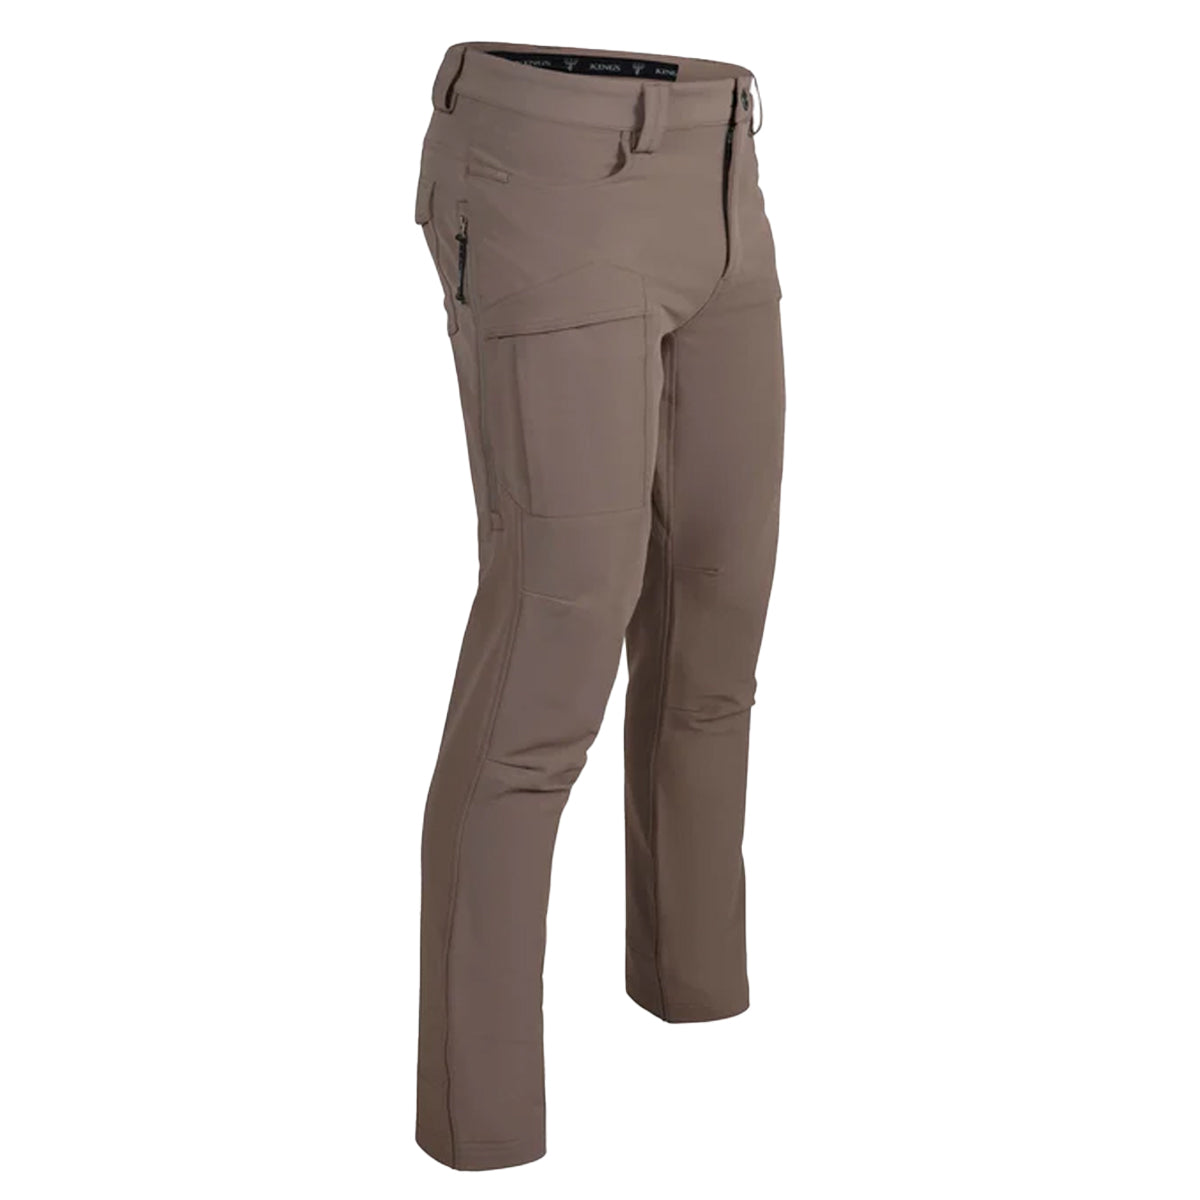 King's Draft Pant in Khaki by GOHUNT | King's - GOHUNT Shop